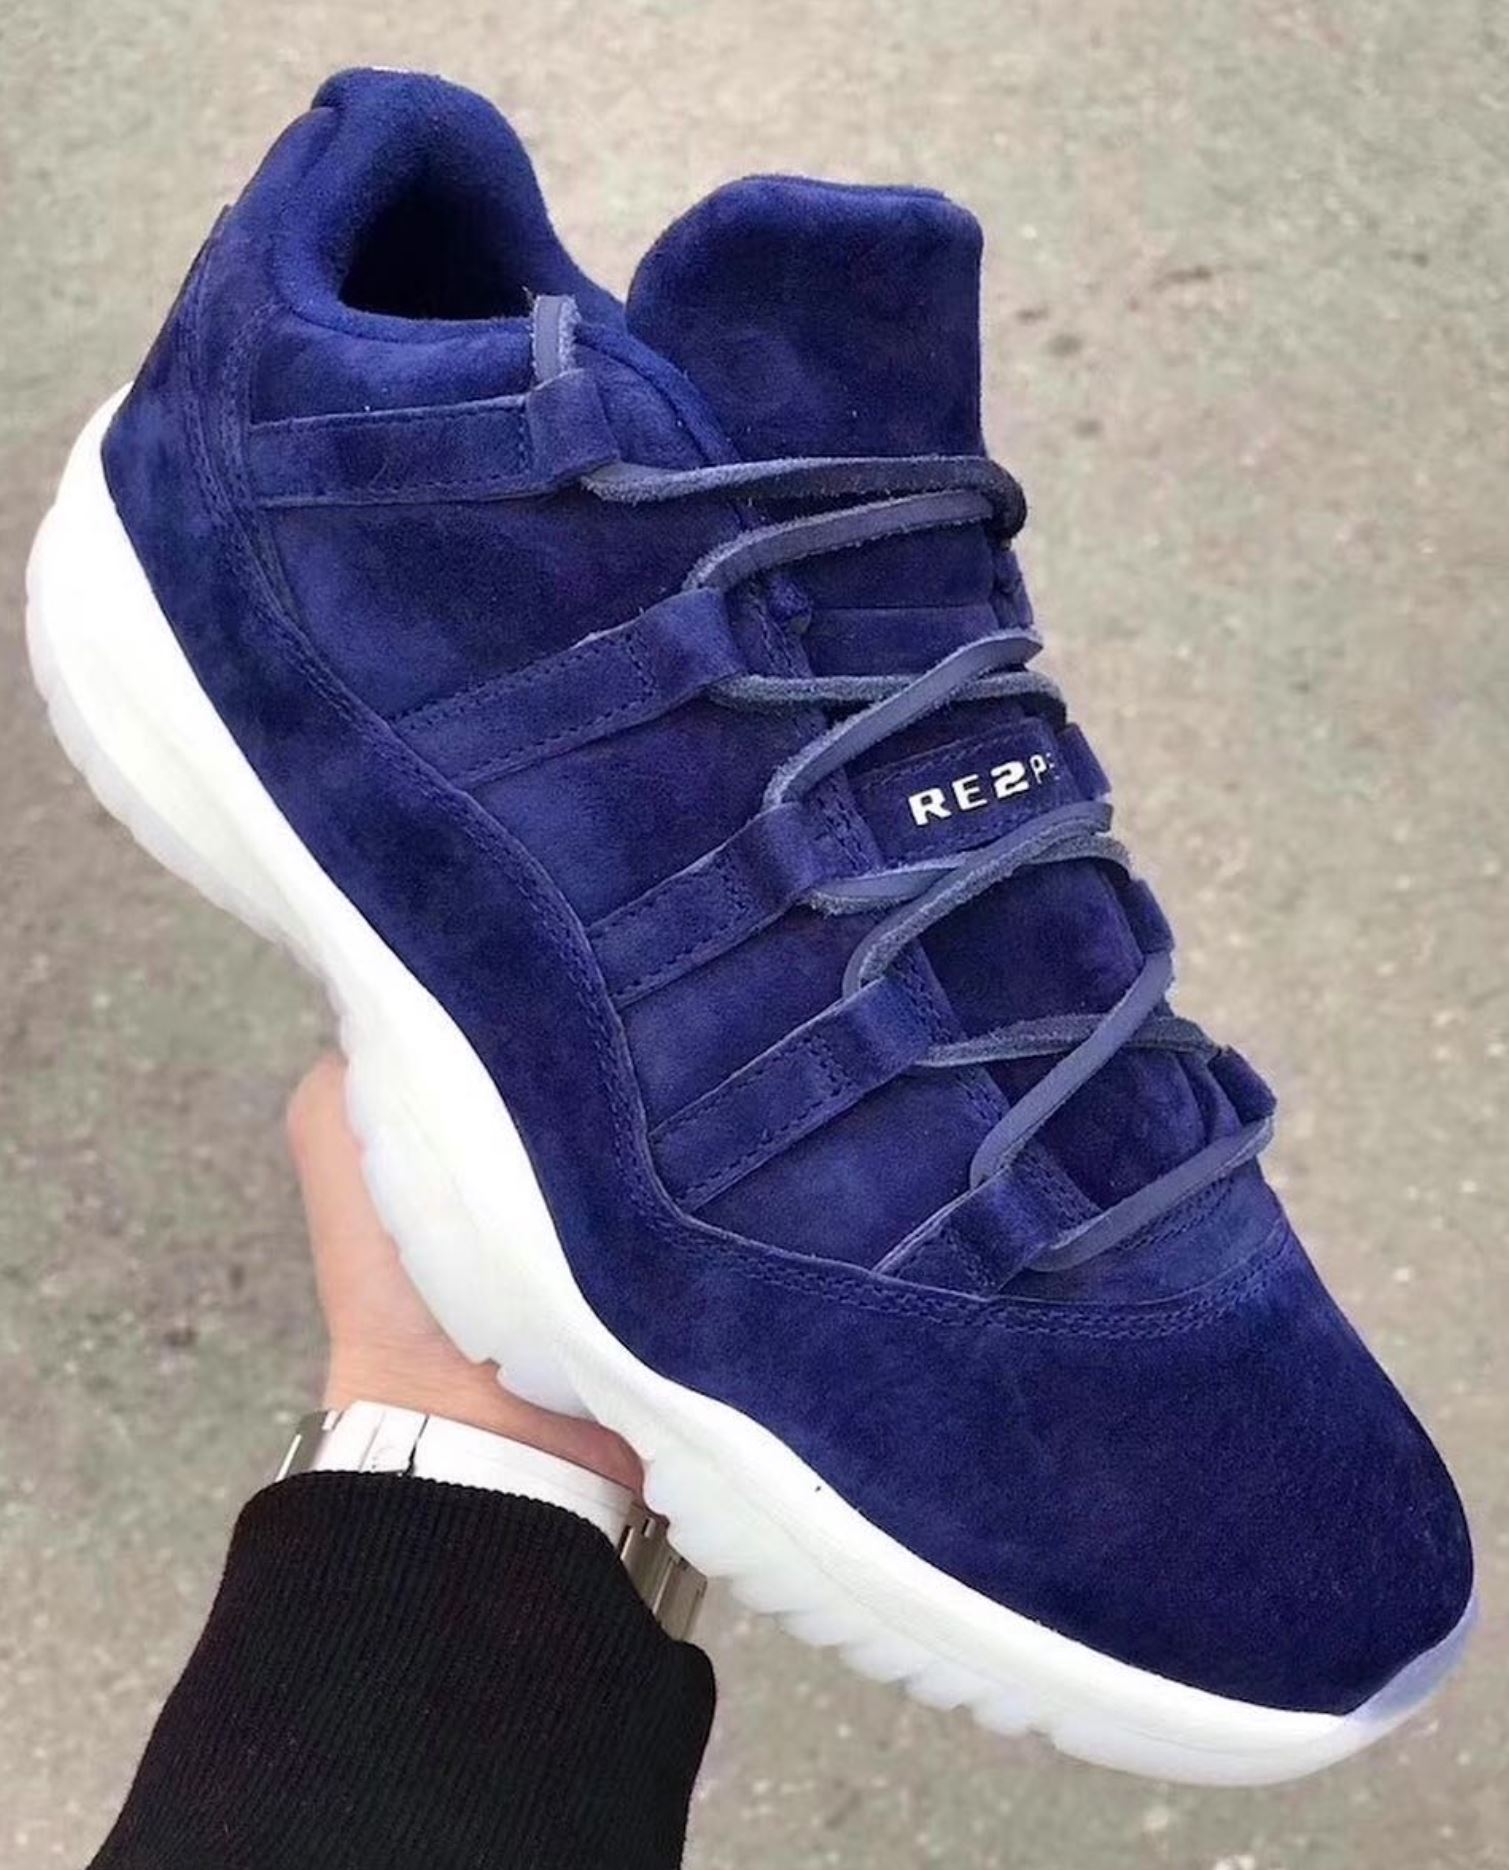 Expect the Jordan 11 Low 'RE2PECT' to Arrive and Honor Derek Jeter - WearTesters